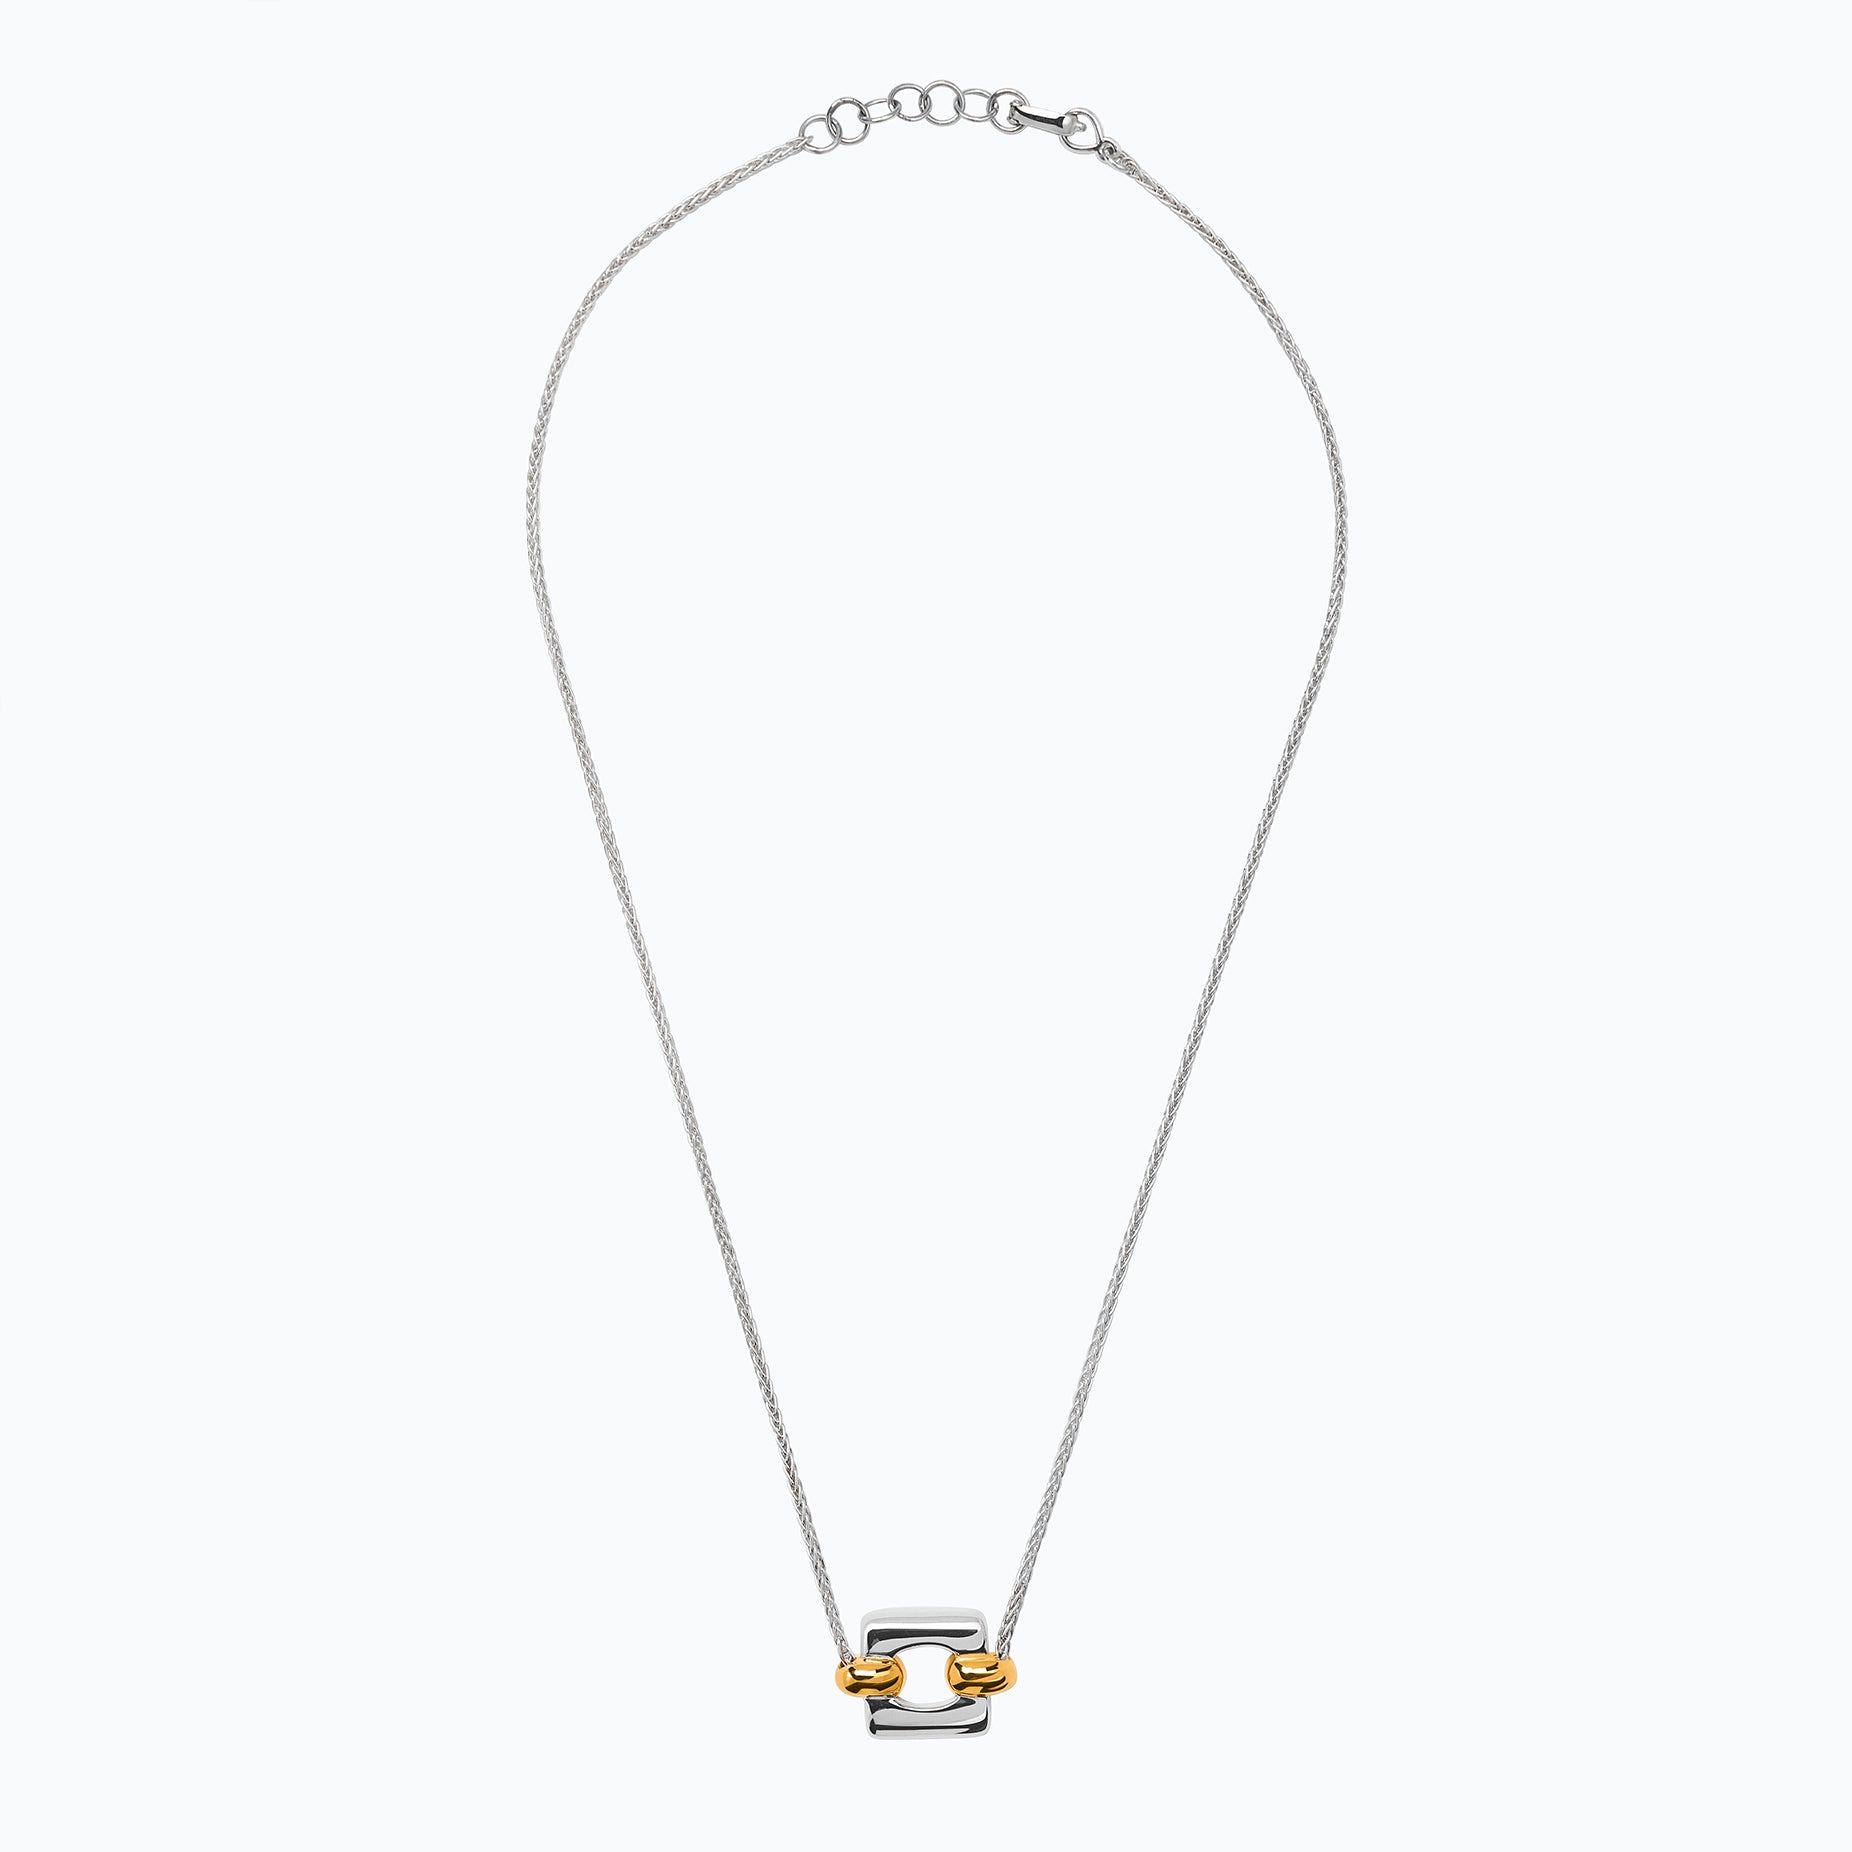 HERENCIA SQUARE AND OVAL PENDANT